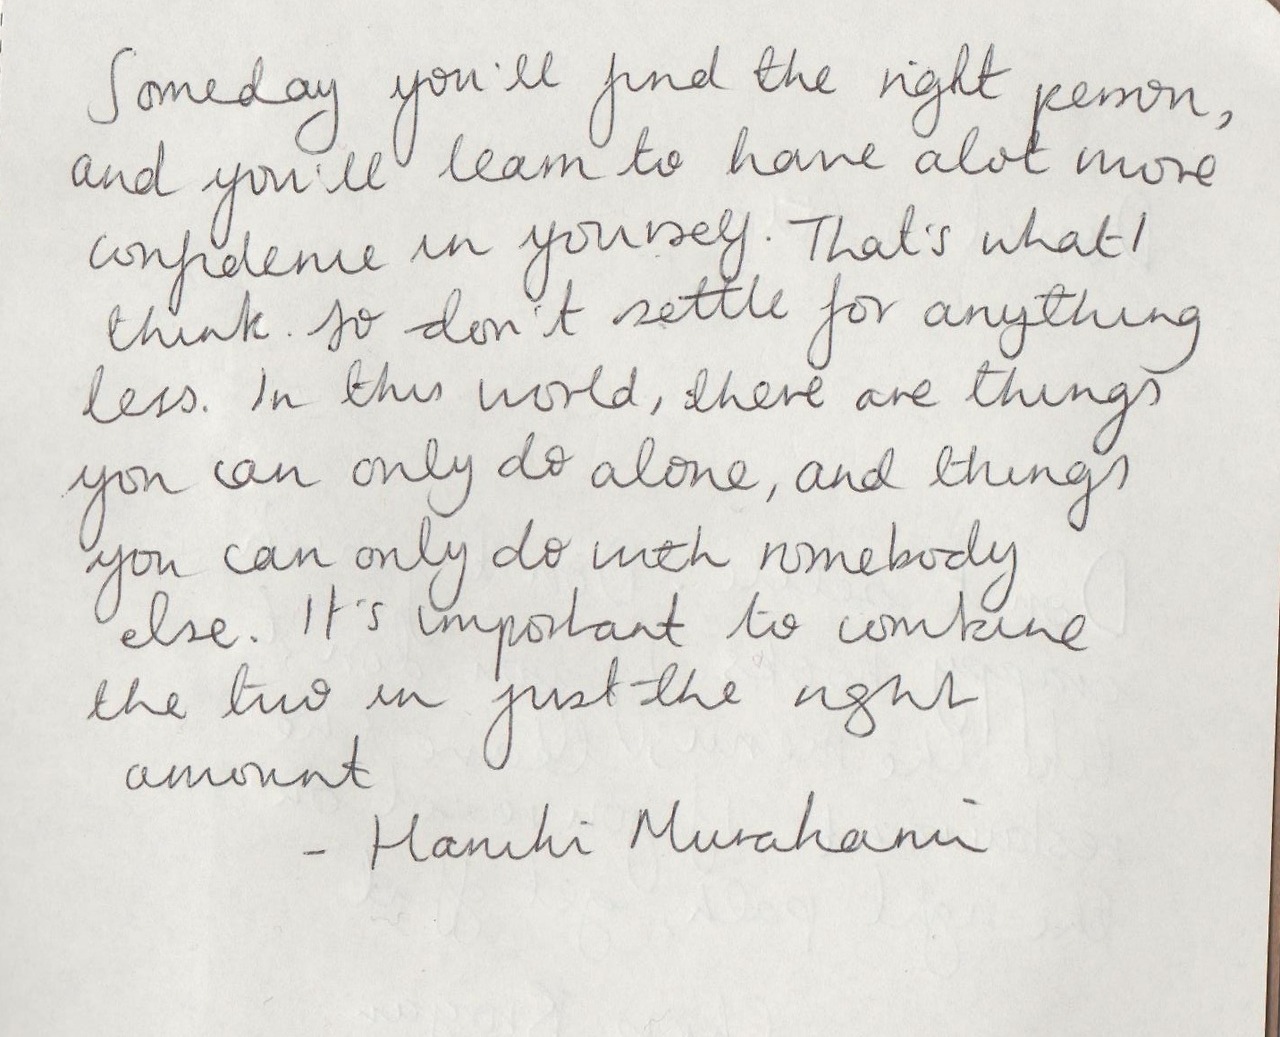 “Someday you’ll find the right person, and you’ll learn to have a lot more